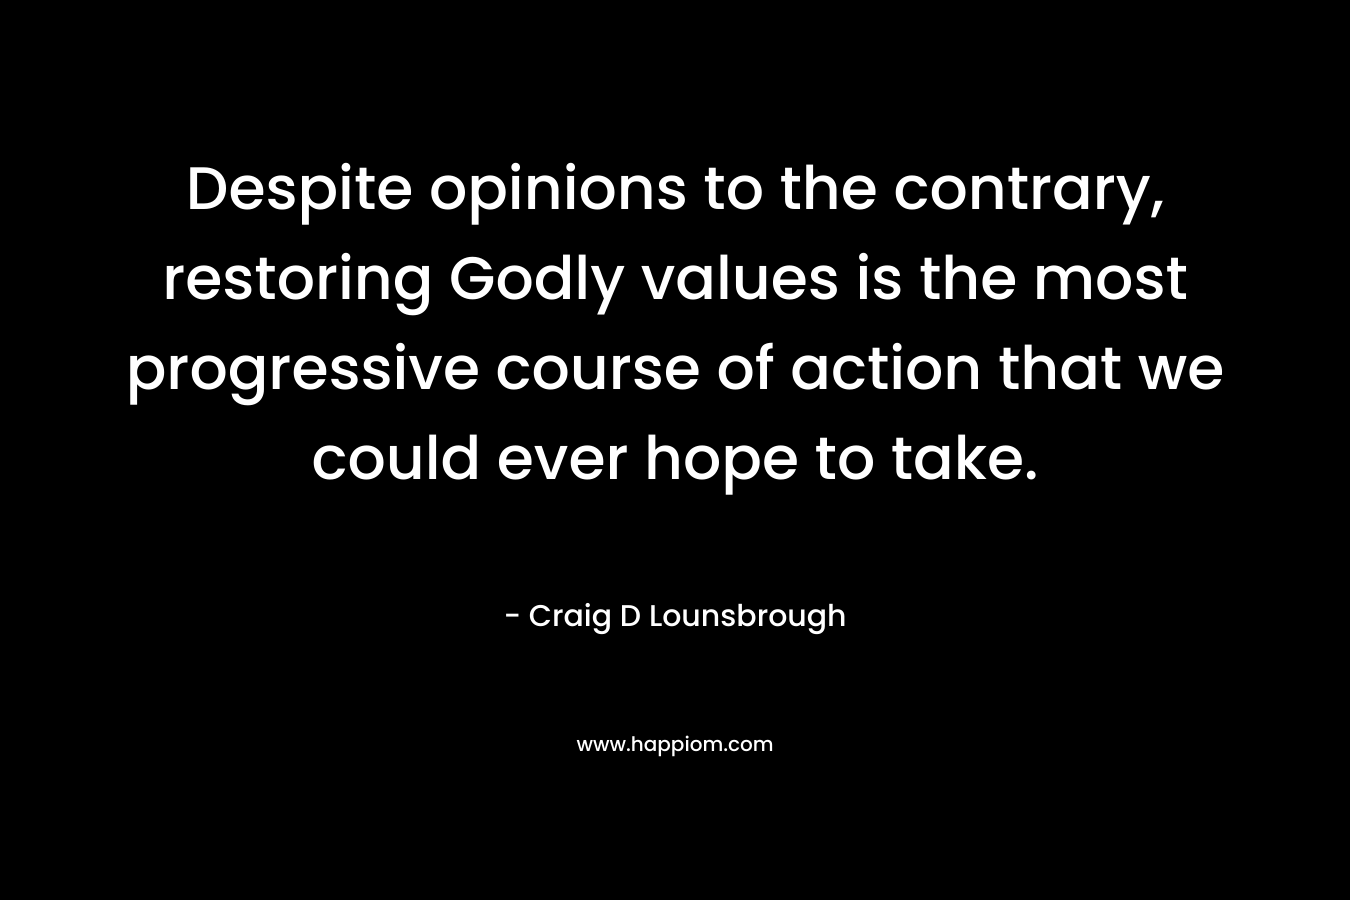 Despite opinions to the contrary, restoring Godly values is the most progressive course of action that we could ever hope to take. – Craig D Lounsbrough